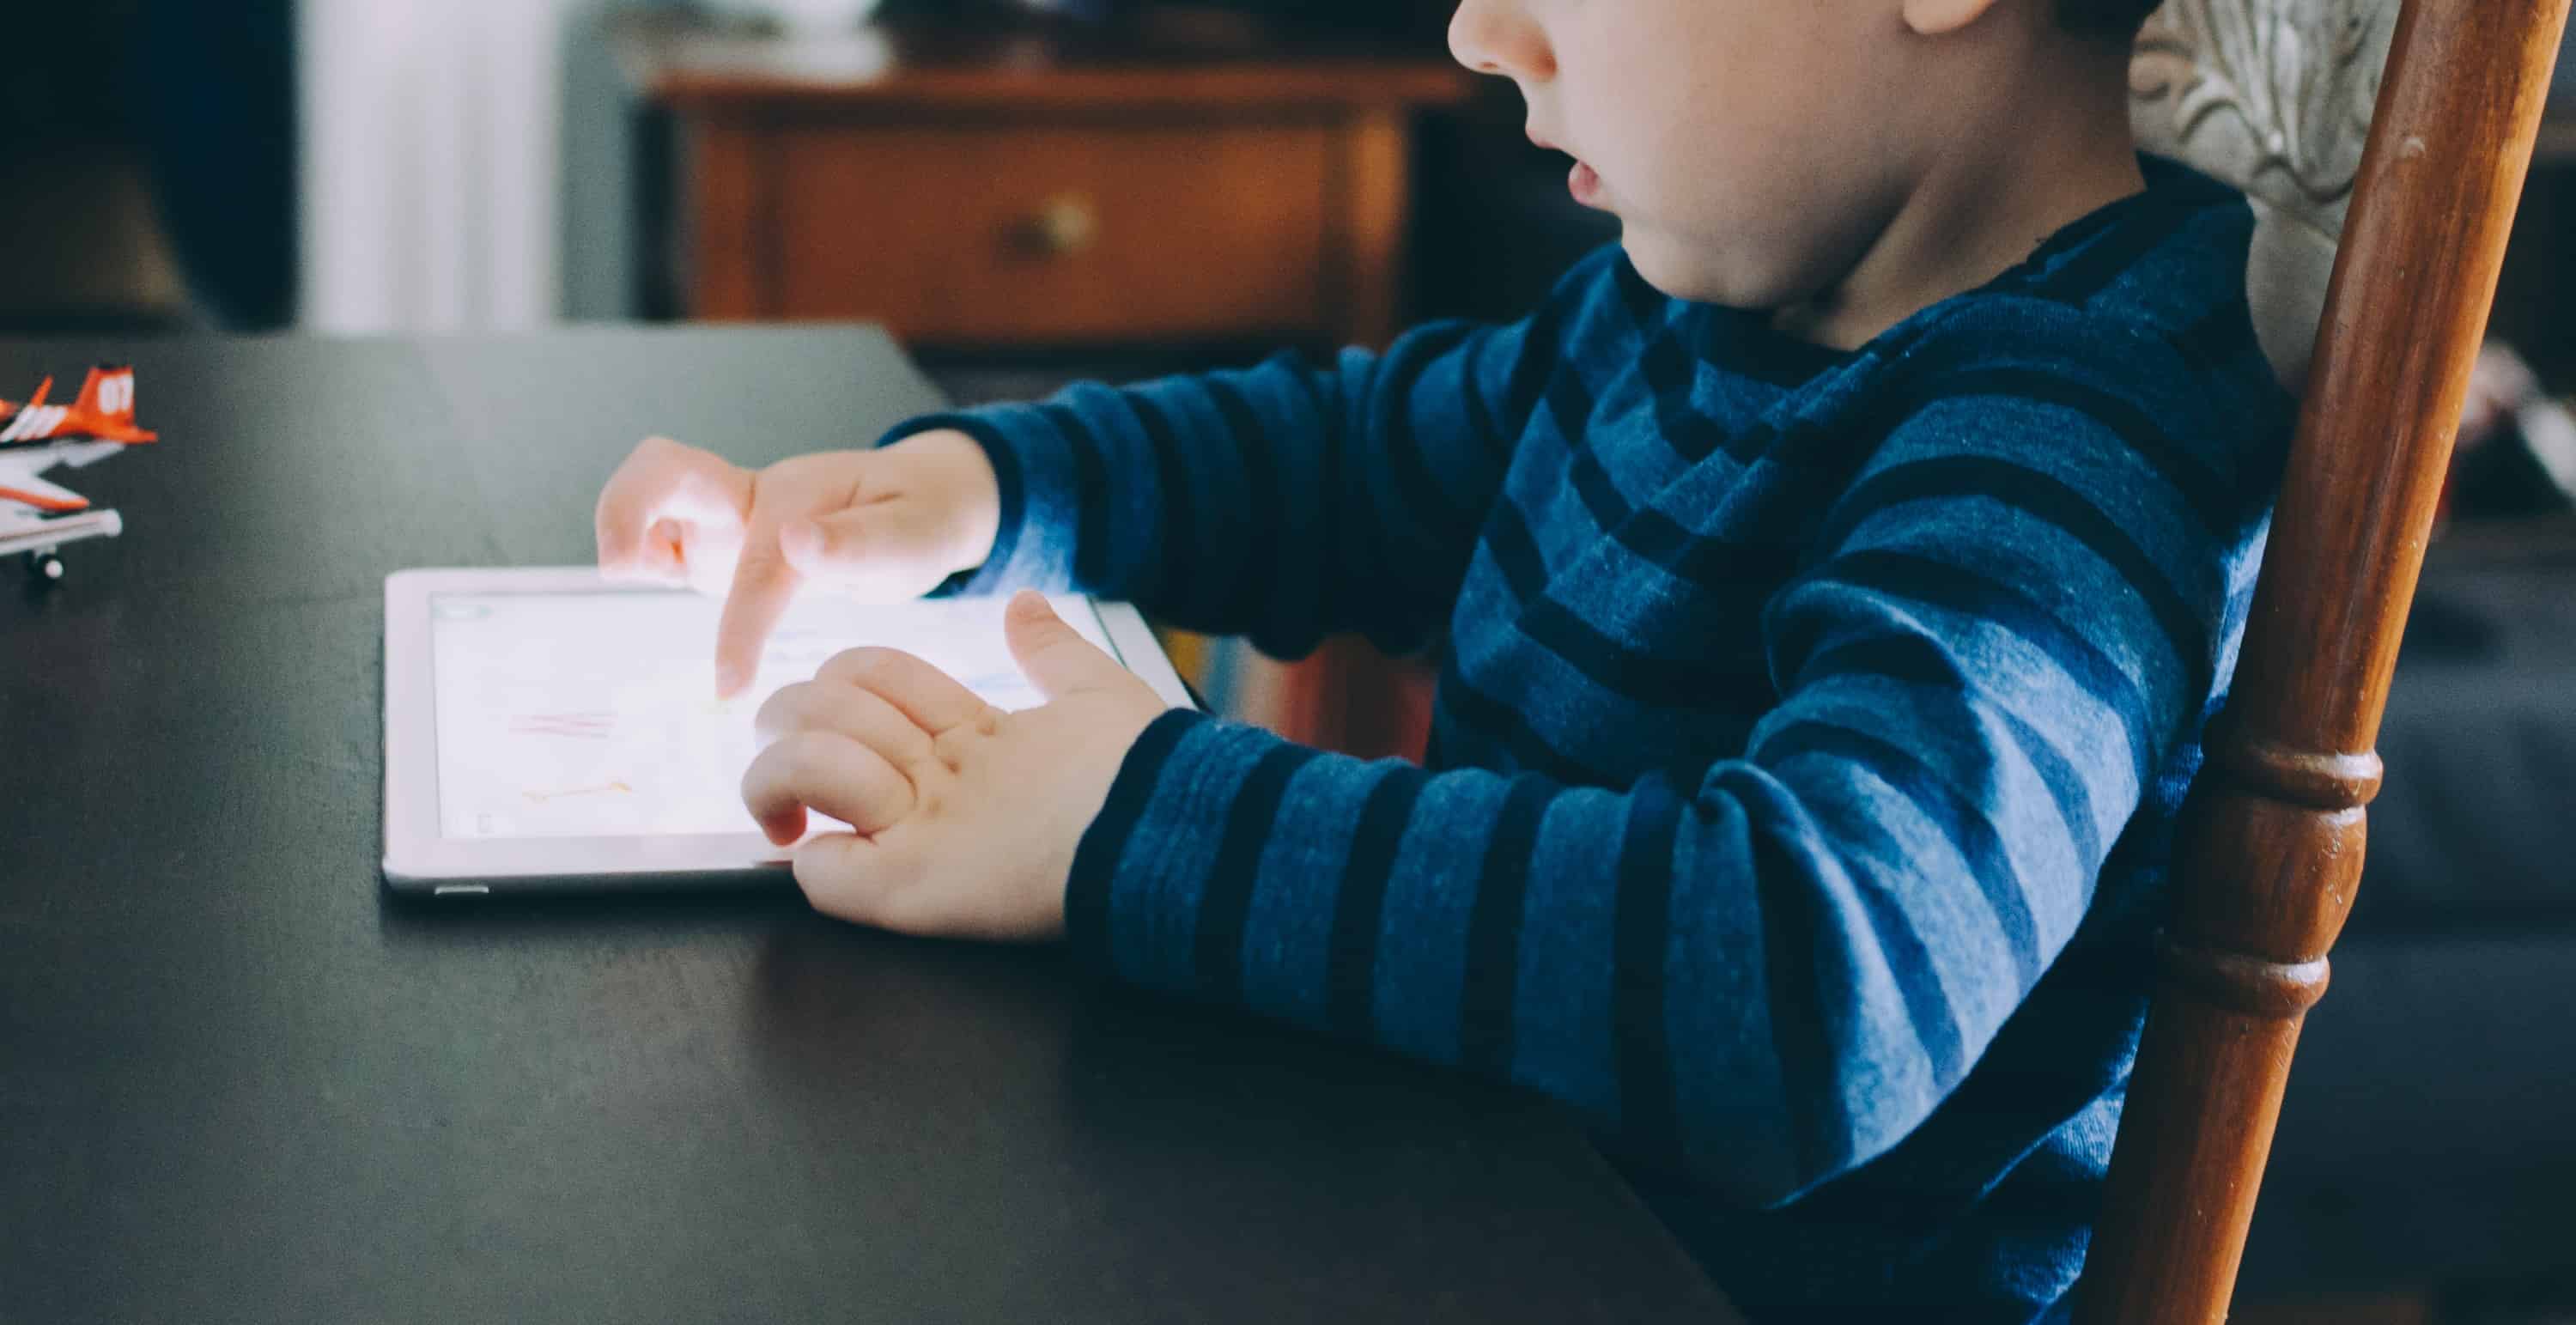 Children's eyes at risk from screen use, but smart solutions are on the way